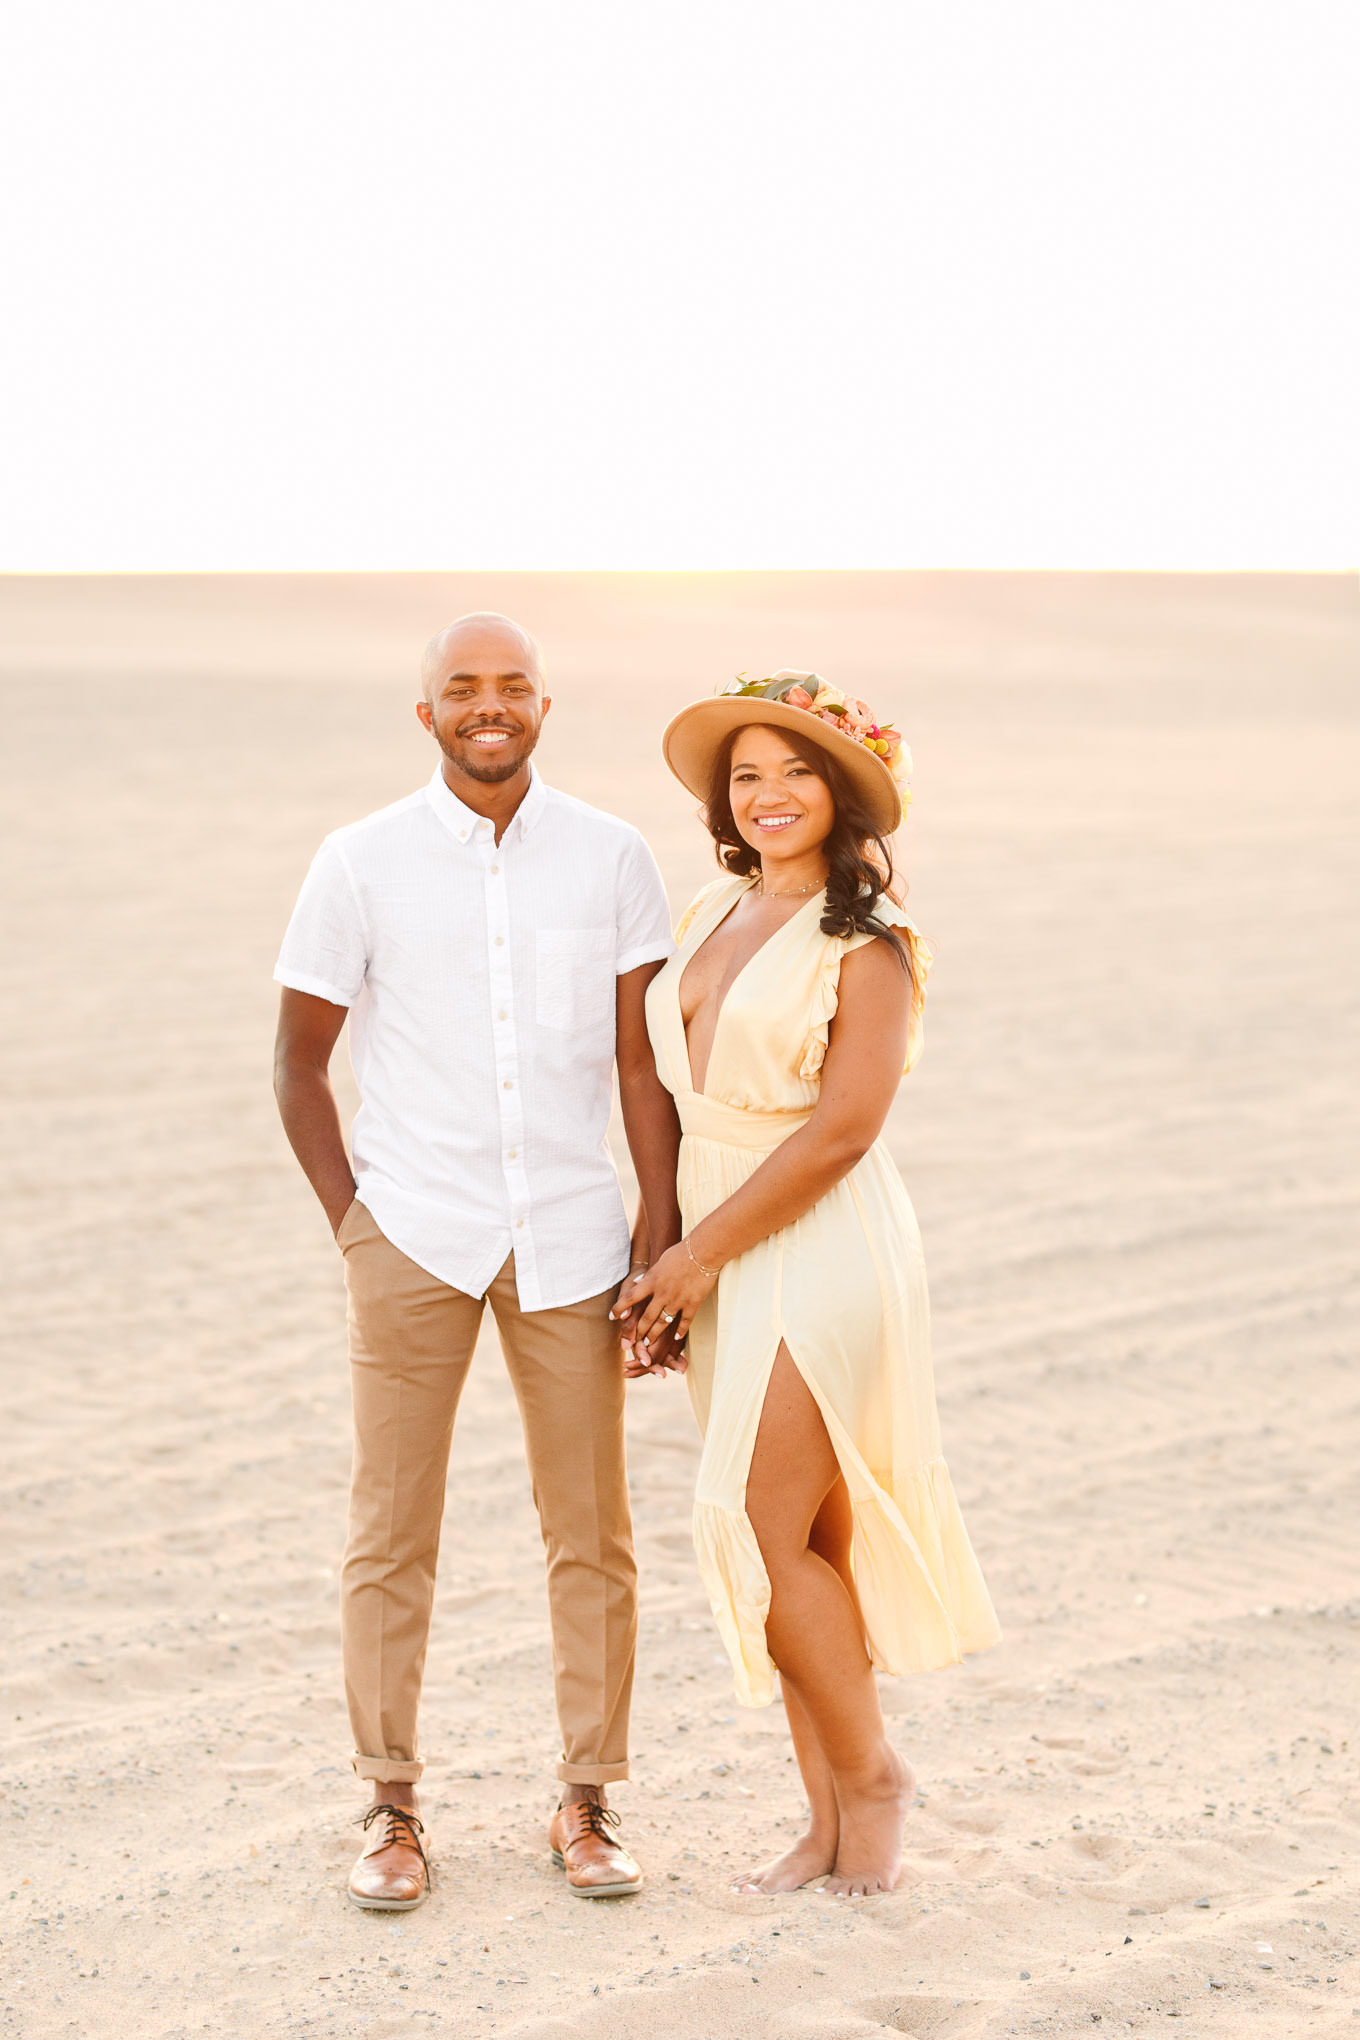 Bride to be wearing a hat at a sand dune | California Sand Dunes engagement session | Colorful Palm Springs wedding photography | #palmspringsphotographer #sanddunes #engagementsession #southerncalifornia  Source: Mary Costa Photography | Los Angeles